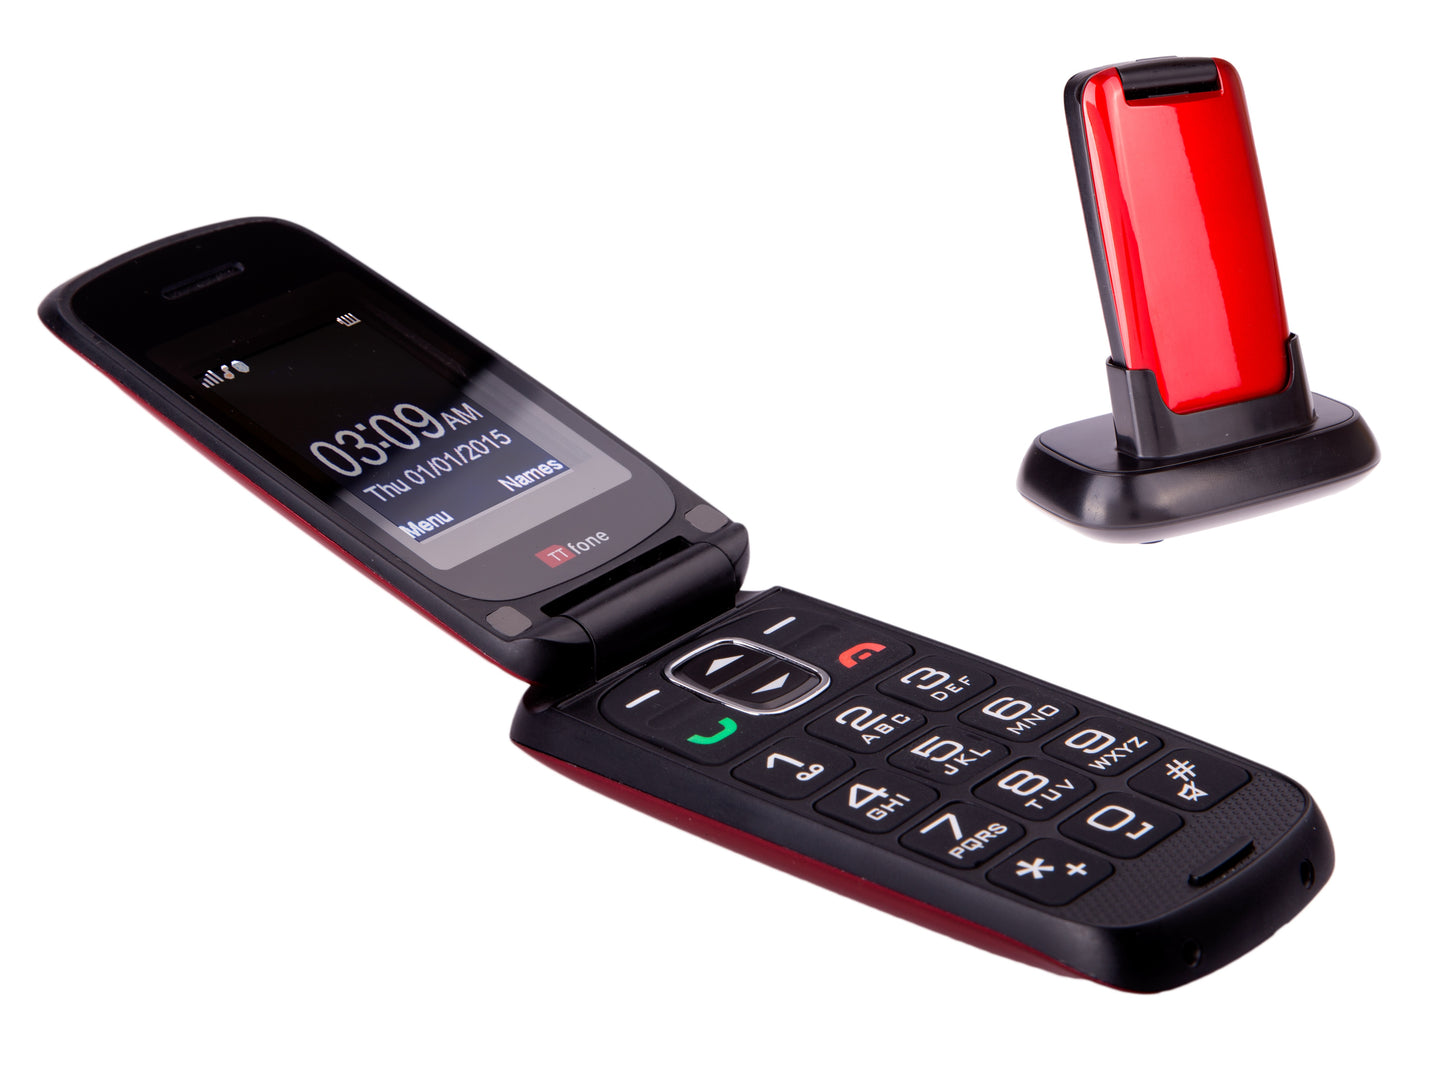 TTfone Red Star TT300 - Warehouse Deals with Vodafone Pay As You Go